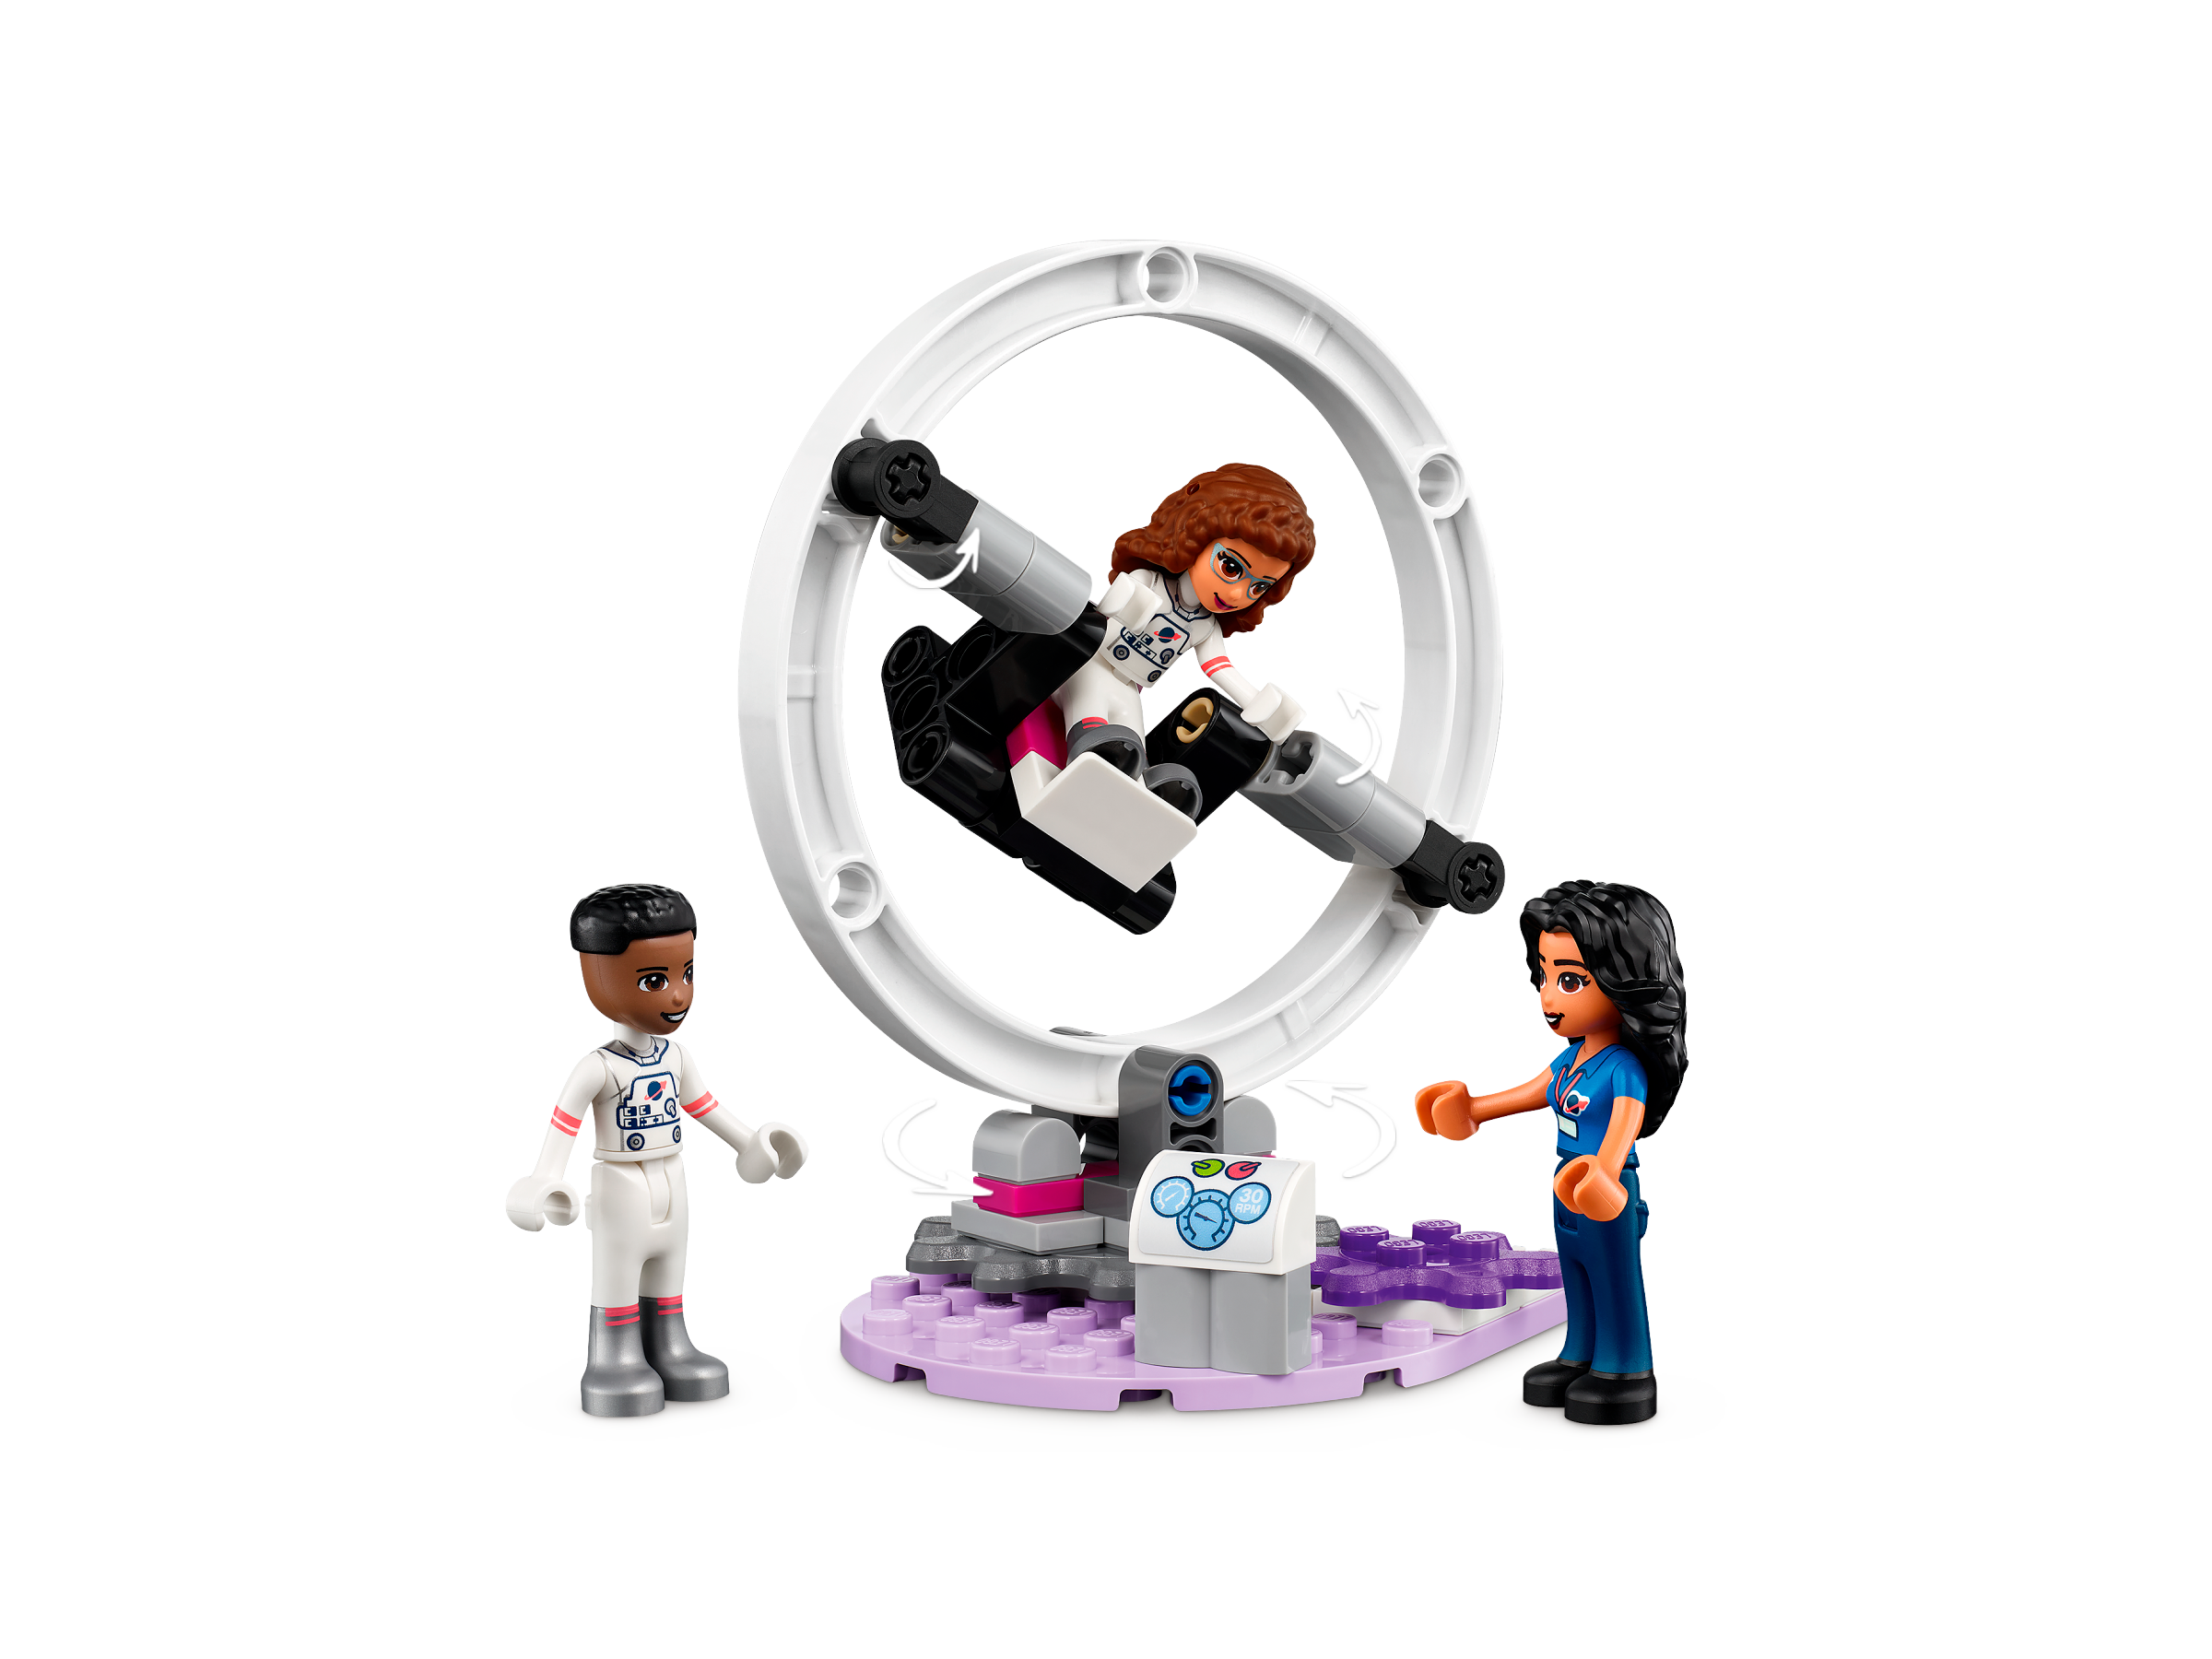 Olivia's Space Academy 41713 | Friends | Buy online at the Official LEGO®  Shop US